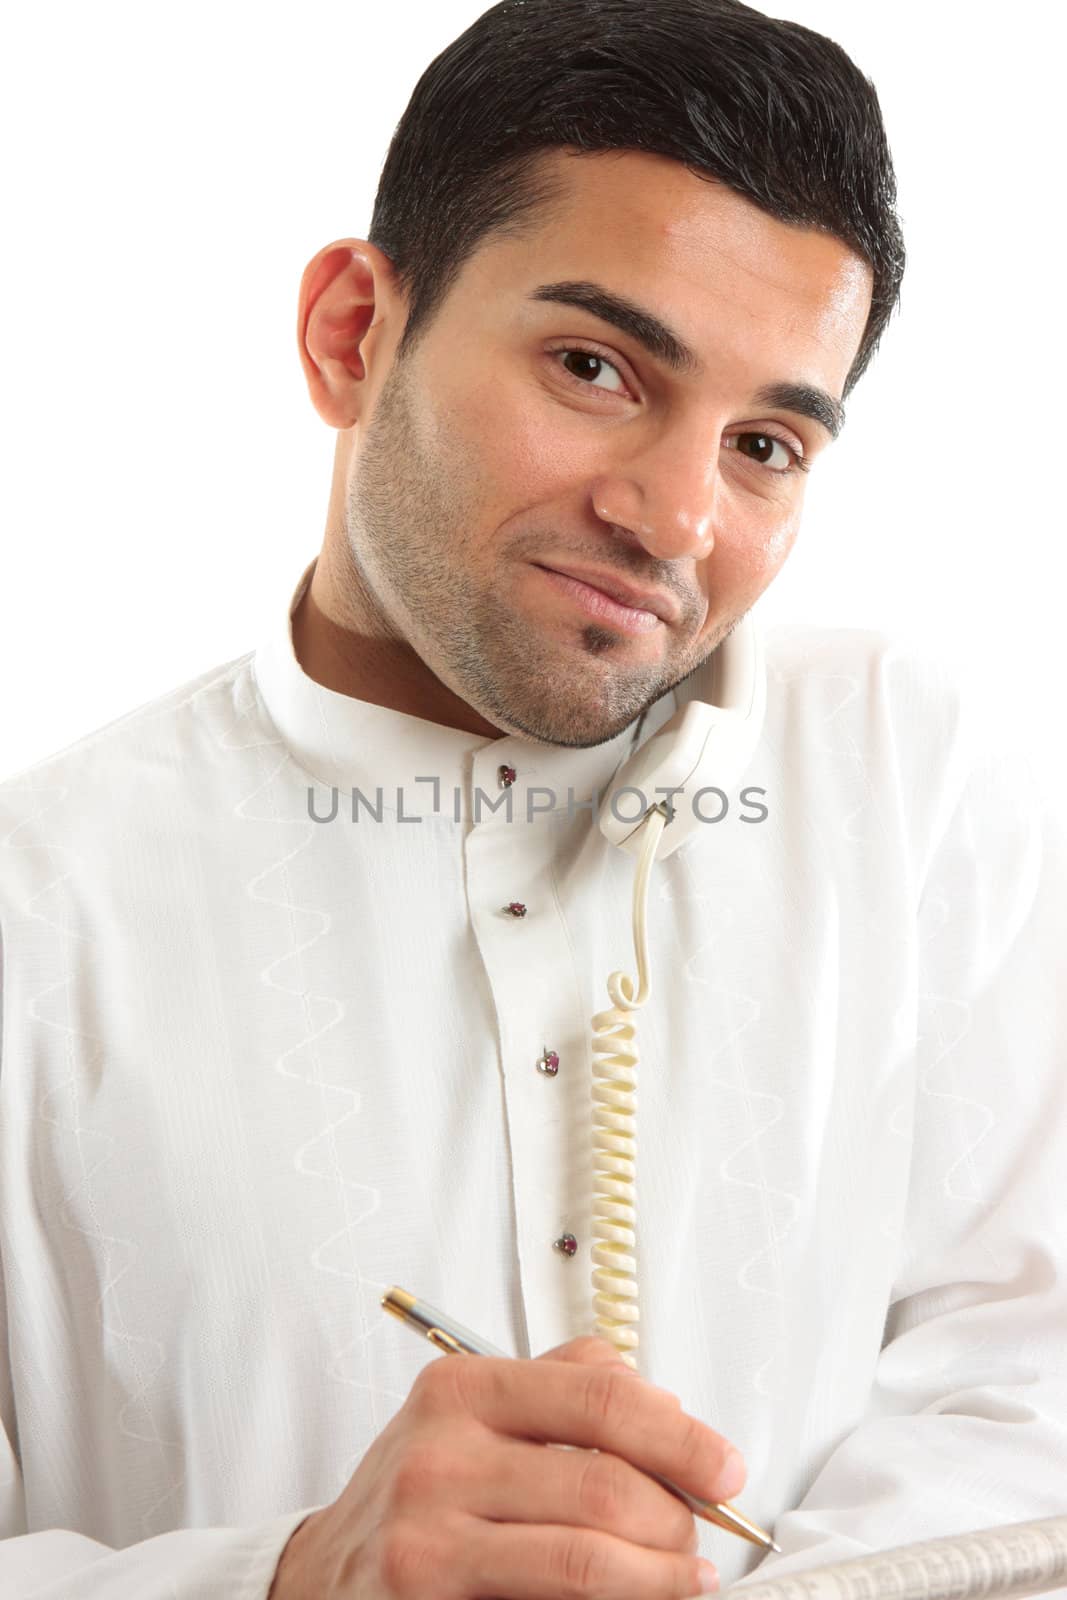 Ethnic mixed race businessman, financial analyst, stockbroker, banker etc on telephone call and holding newspaper